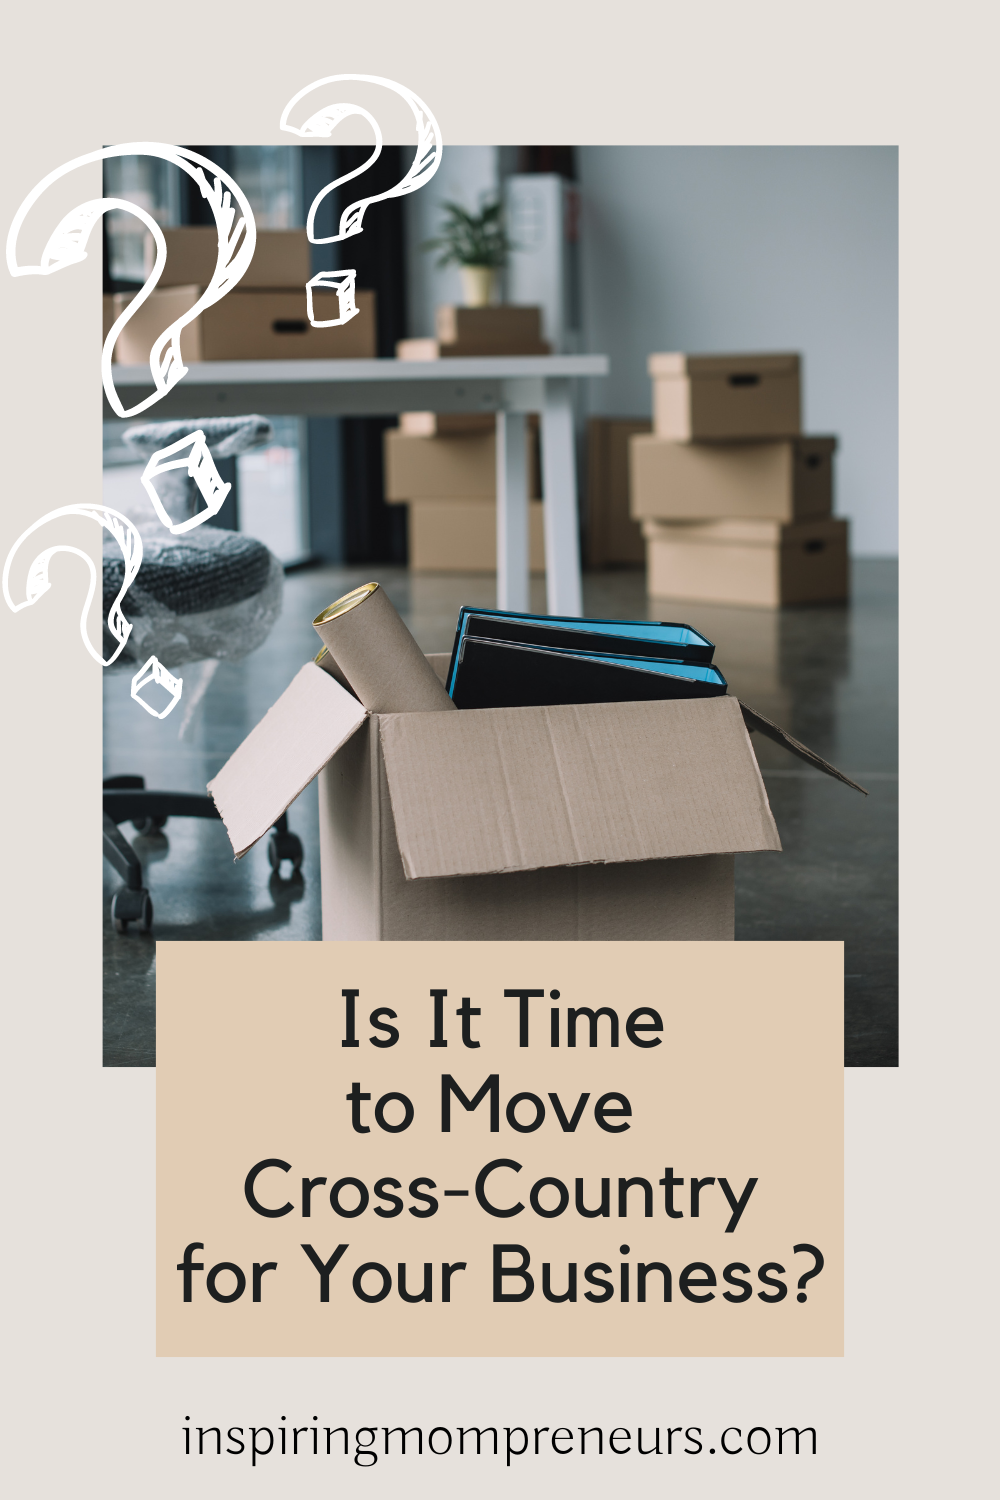 Knowing when "it makes sense" to relocate your business is key. In this post, we explore six times you might consider it good business to move cross-country.